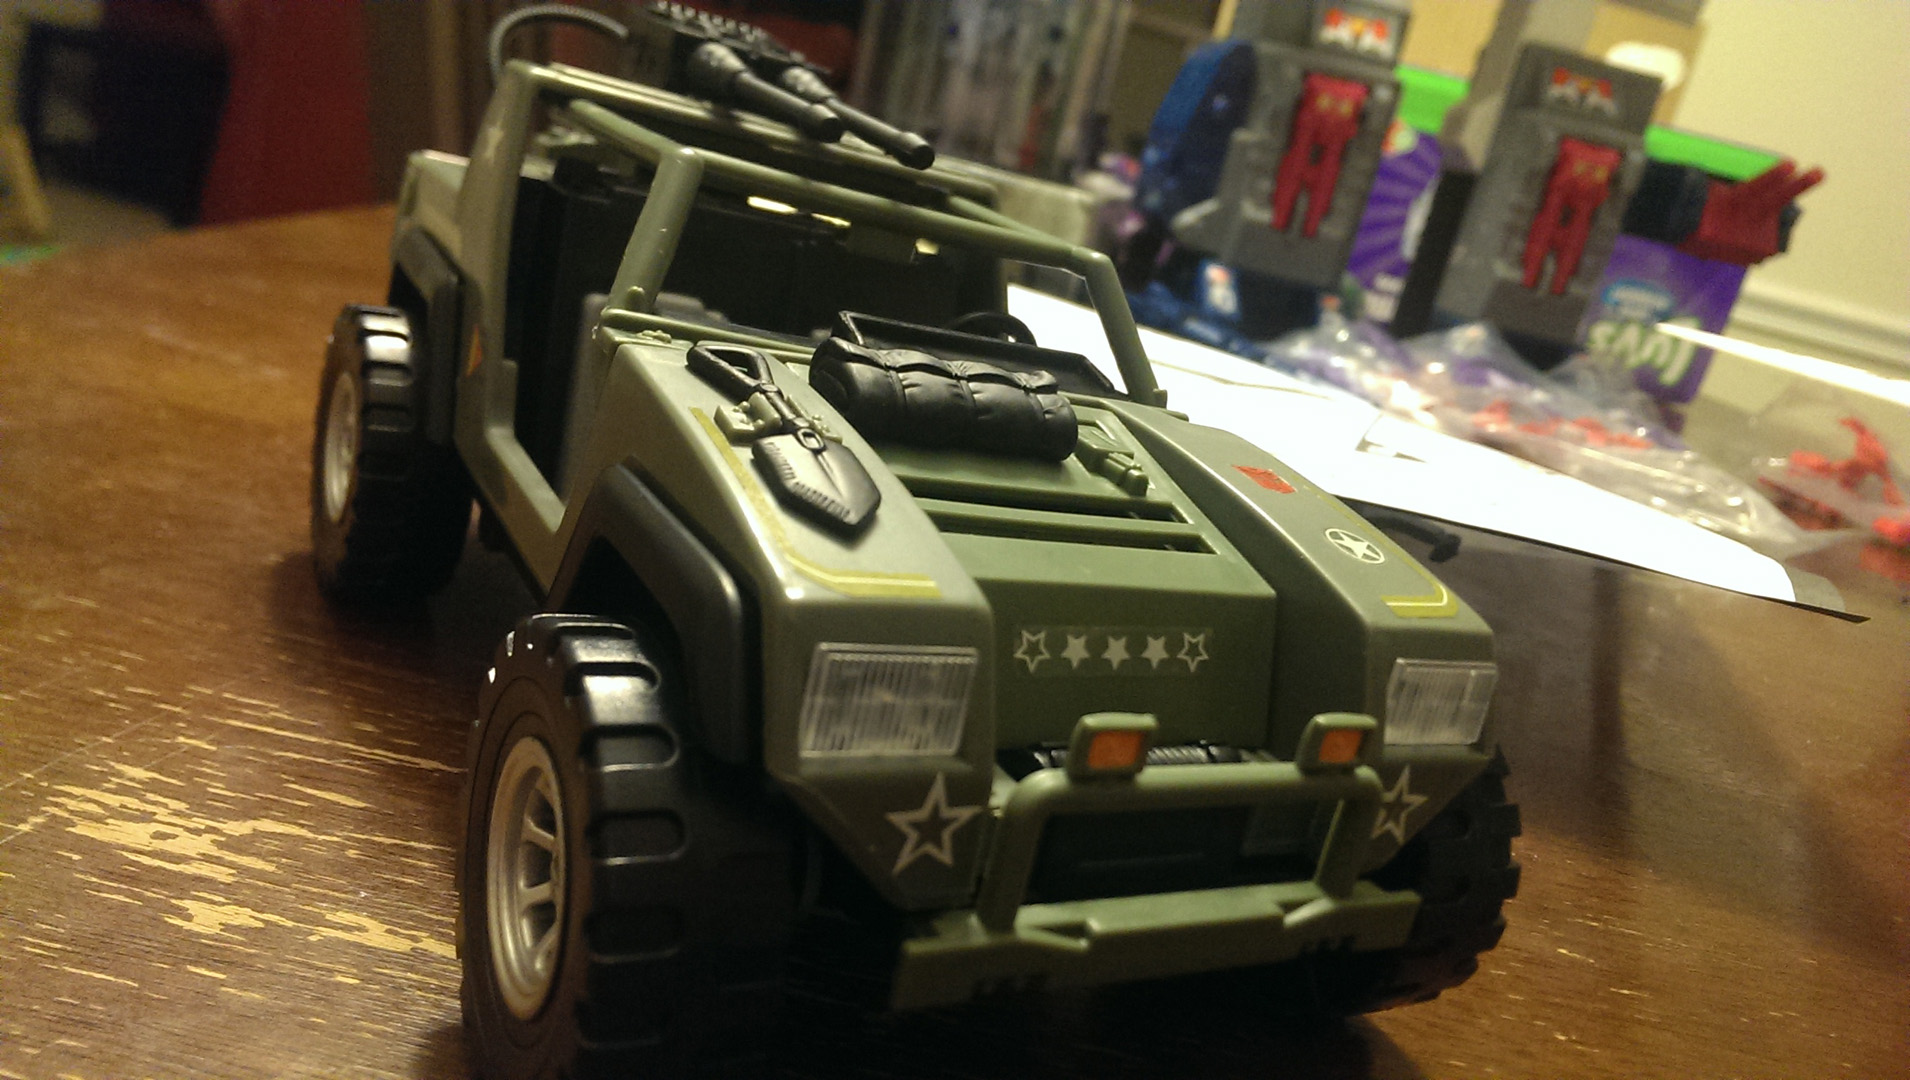 Hasbro’s SDCC Exclusive G.I. Joe/Transformers Crossover Is So Sweet